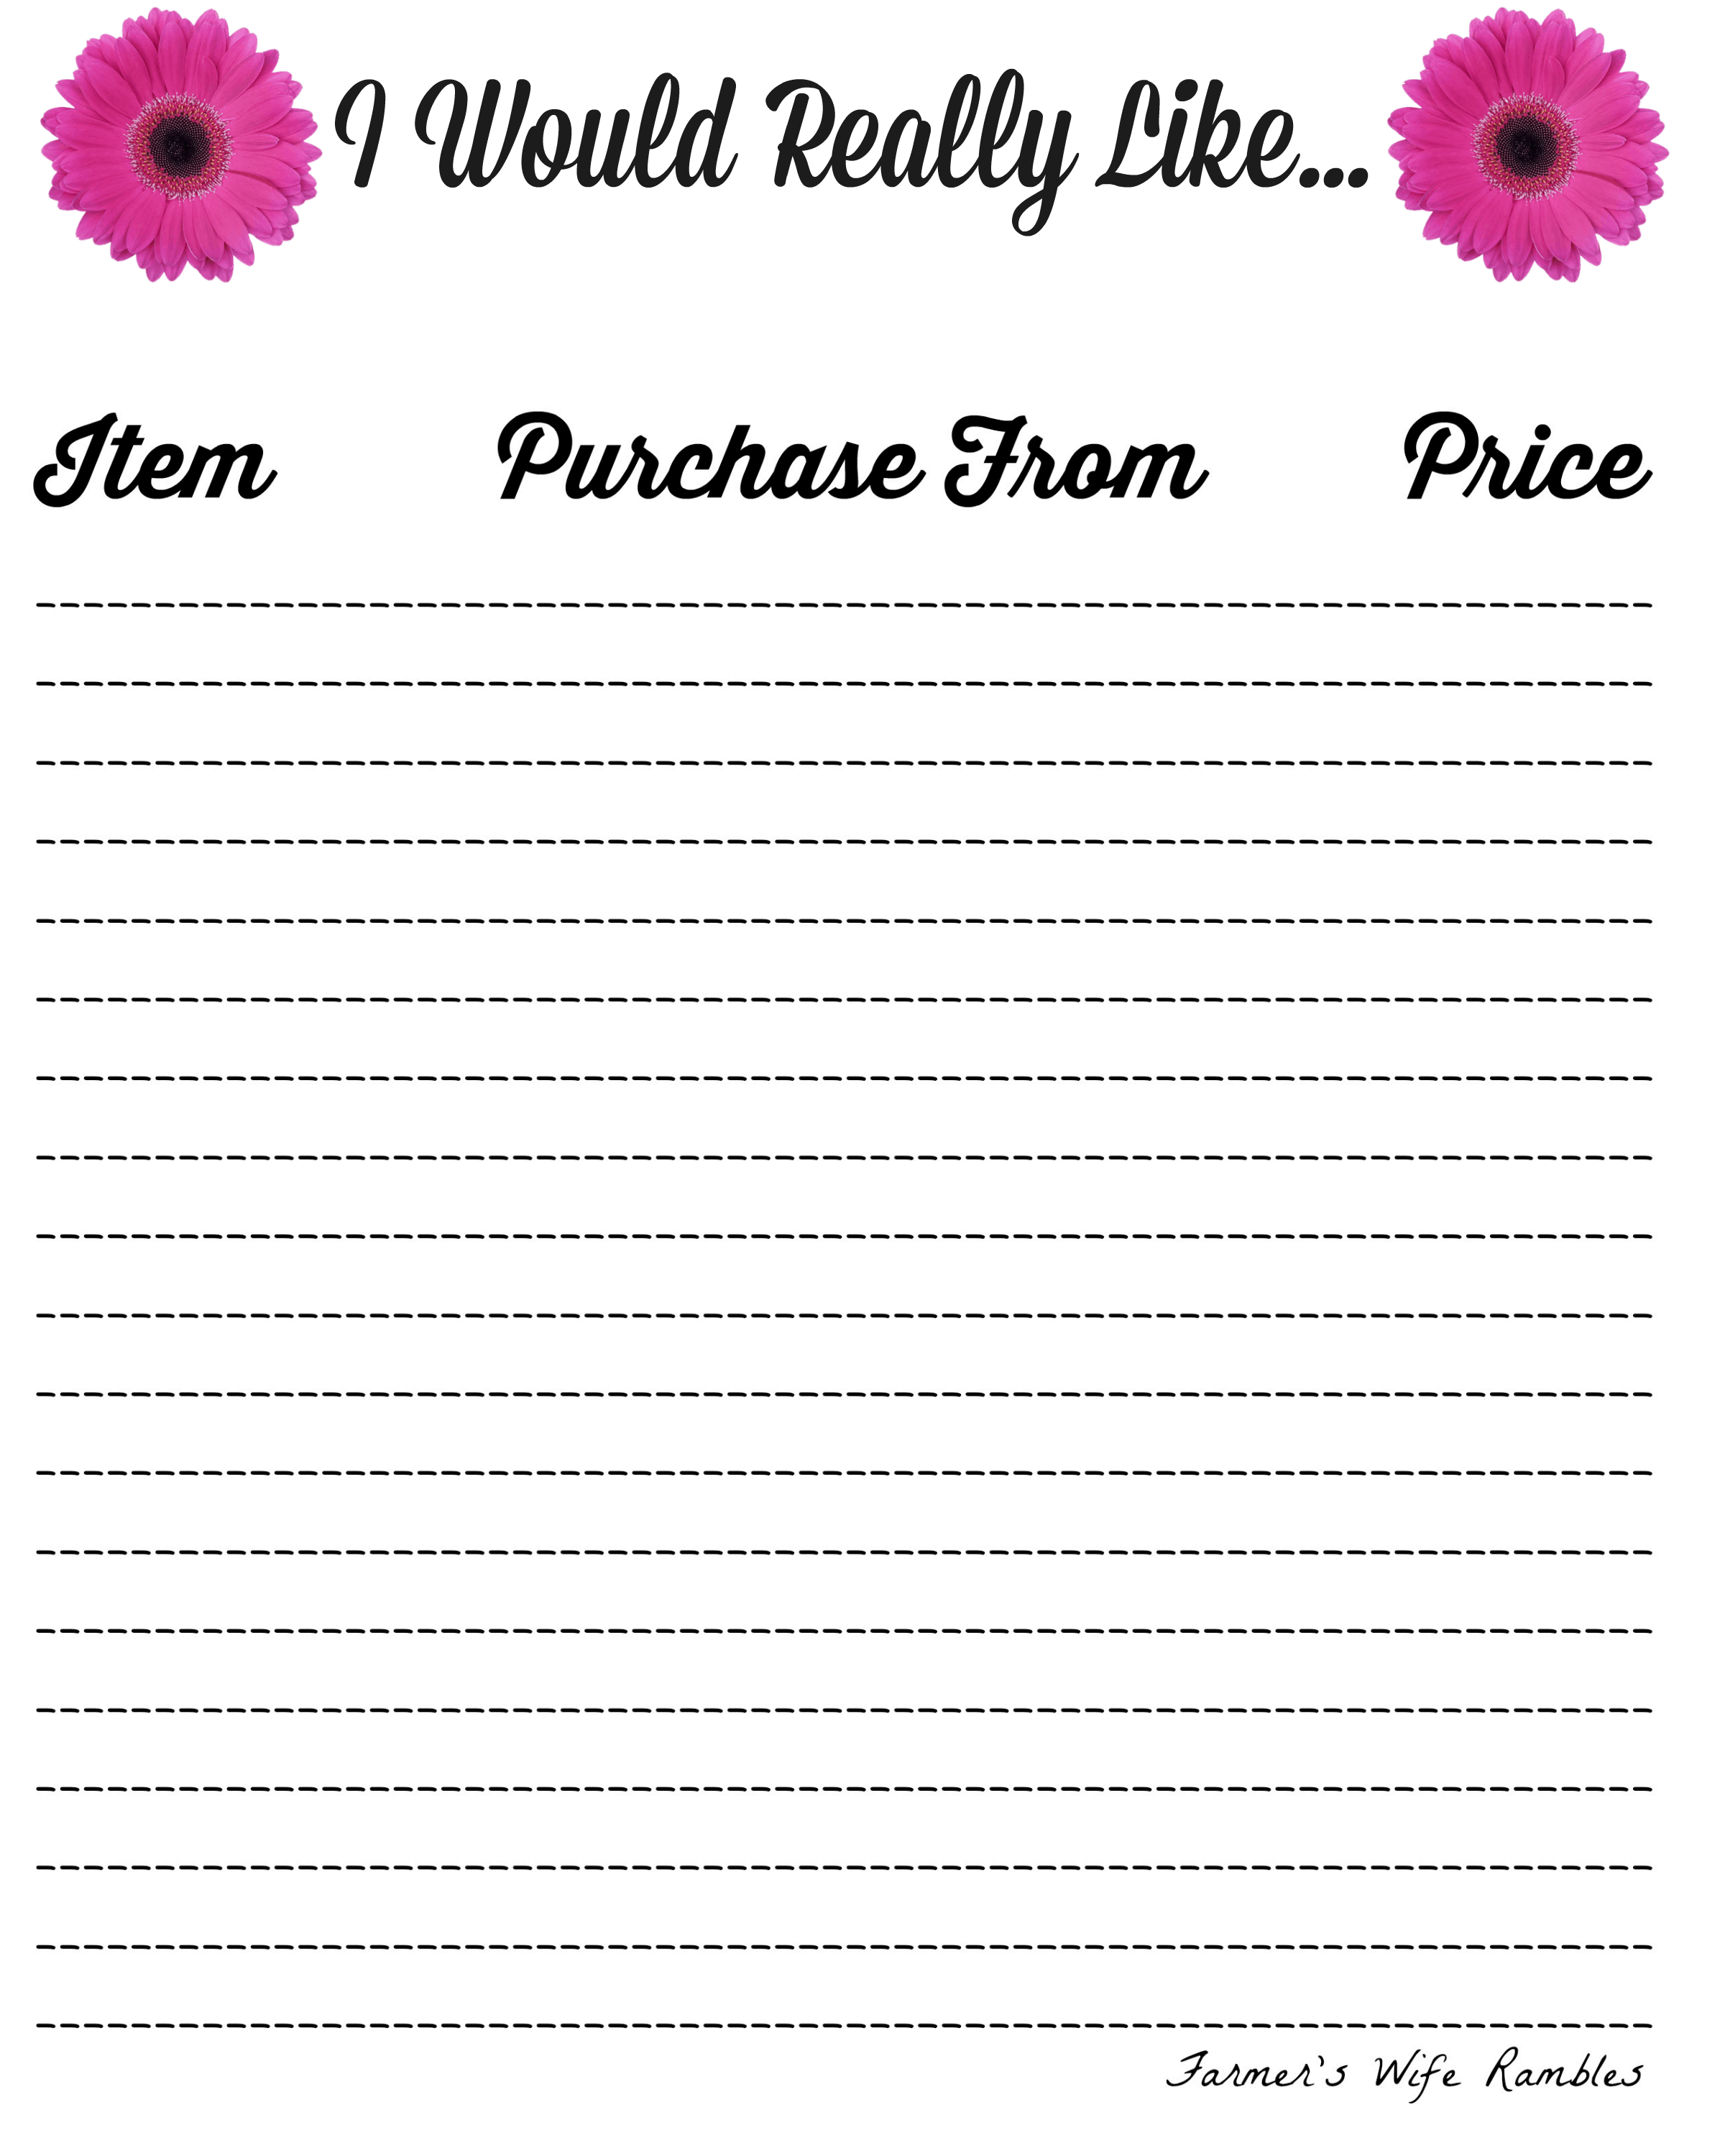 free-i-would-really-like-wish-list-printable-pink-daisies